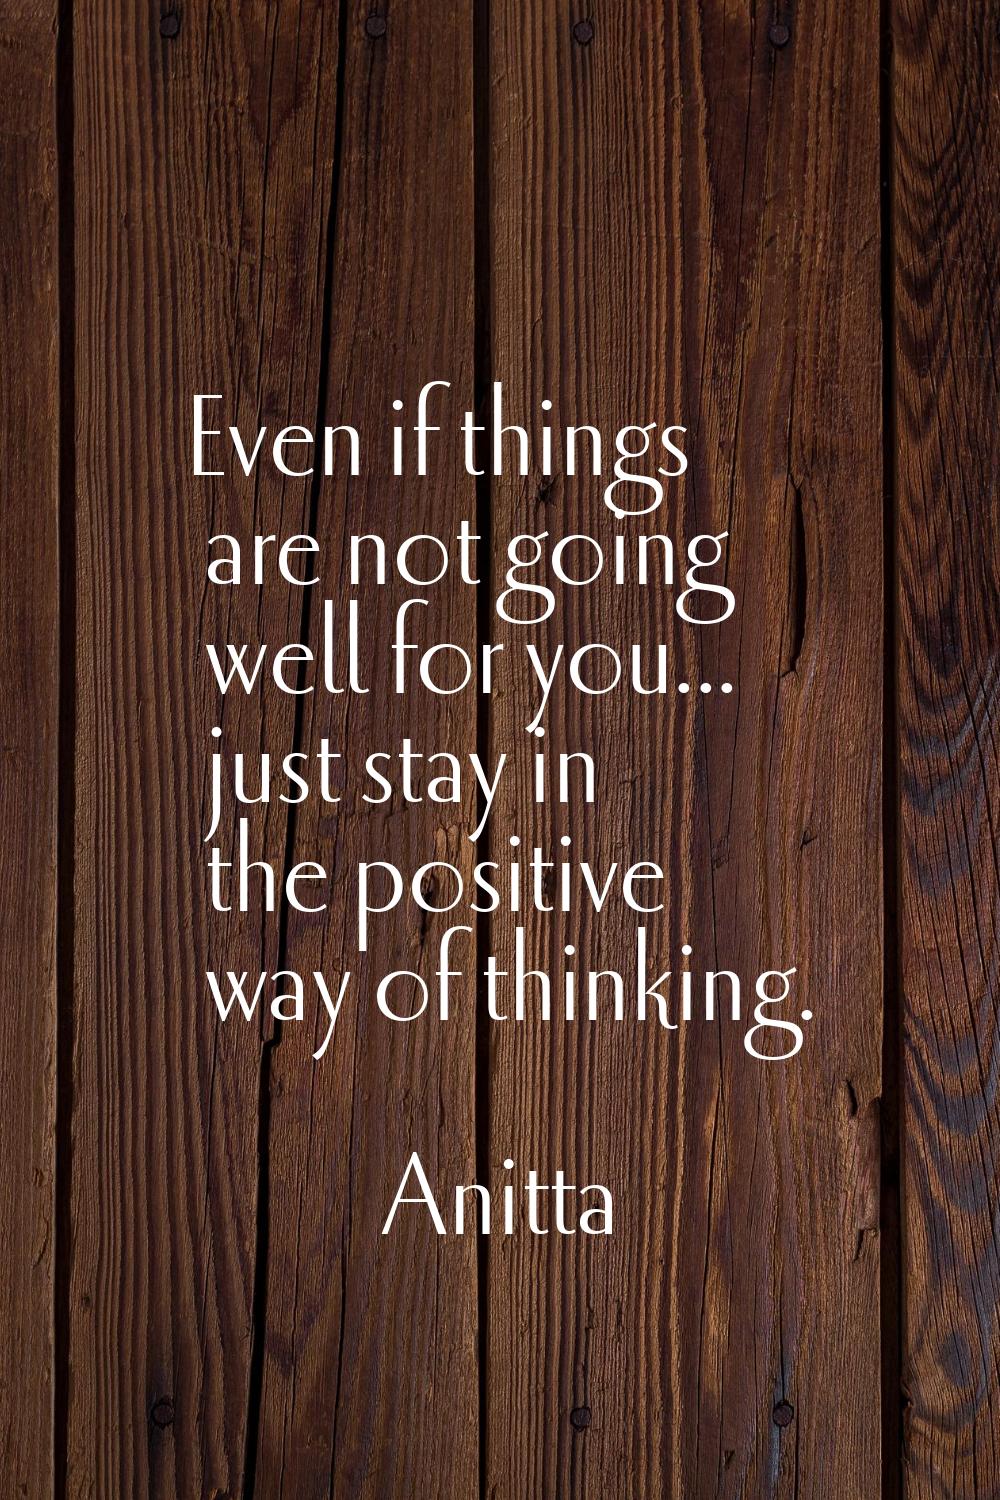 Even if things are not going well for you... just stay in the positive way of thinking.